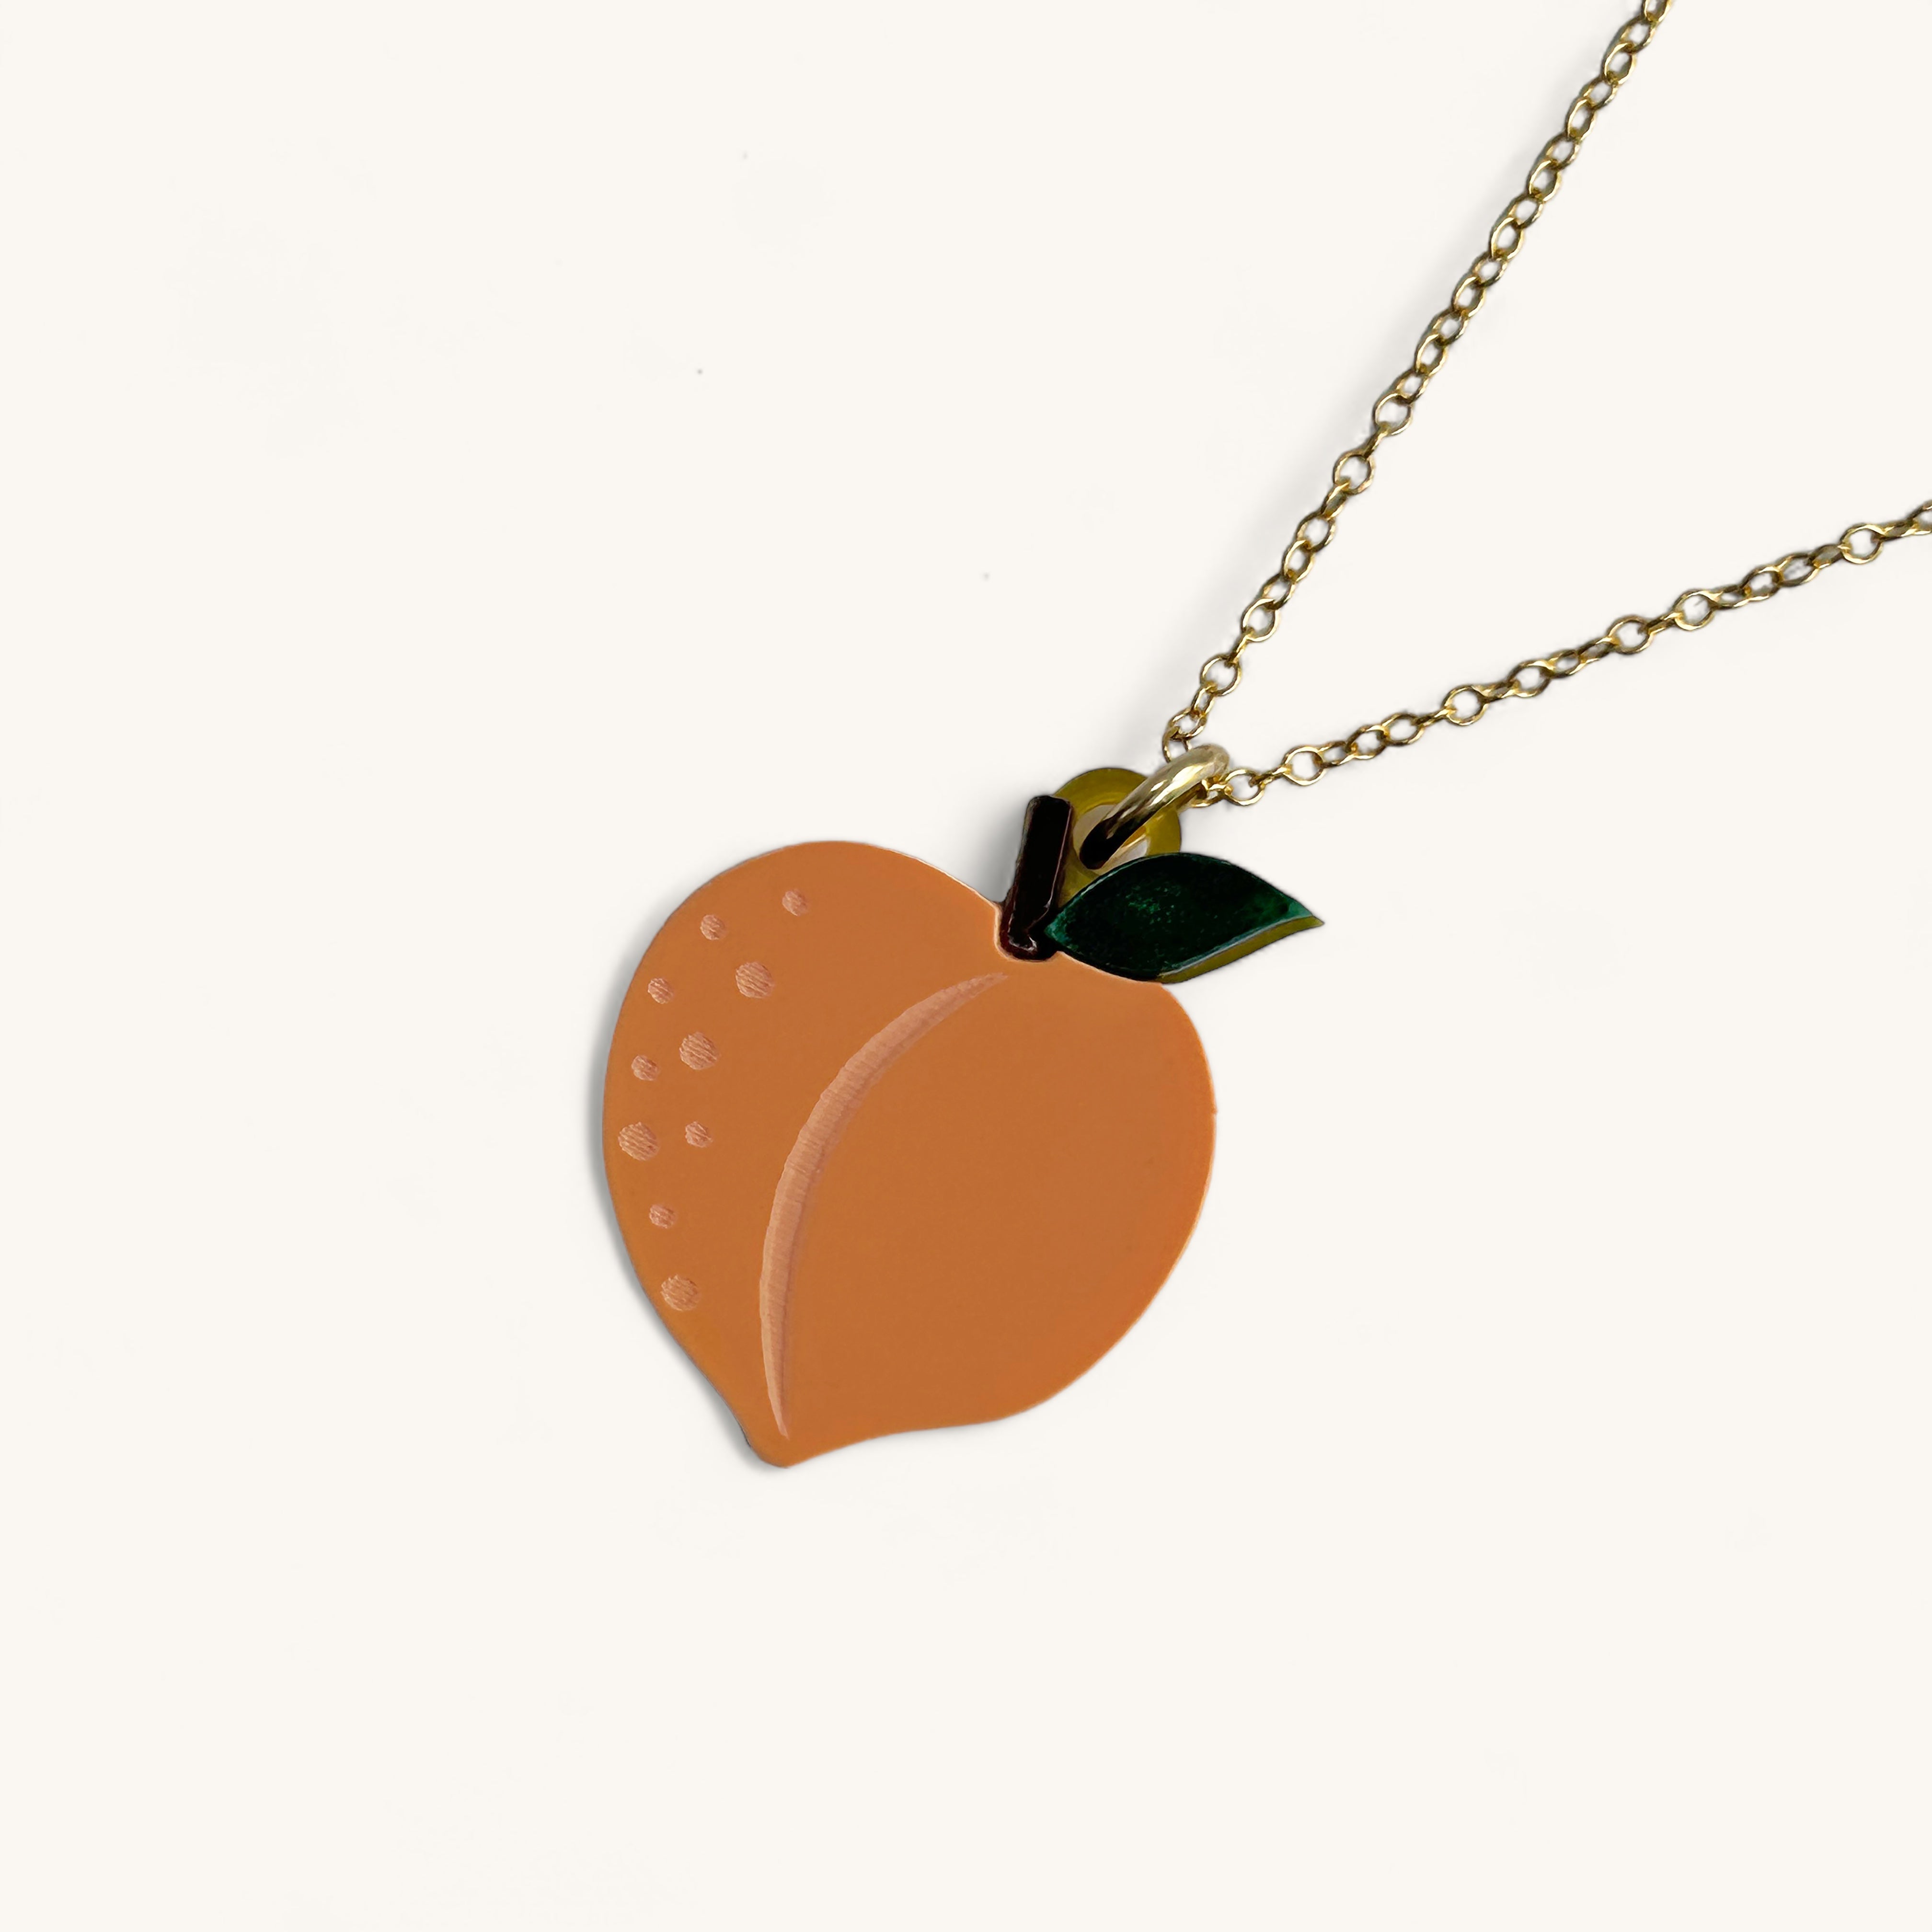 Jennifer Loiselle acrylic peach fruit necklace with gold filled chain